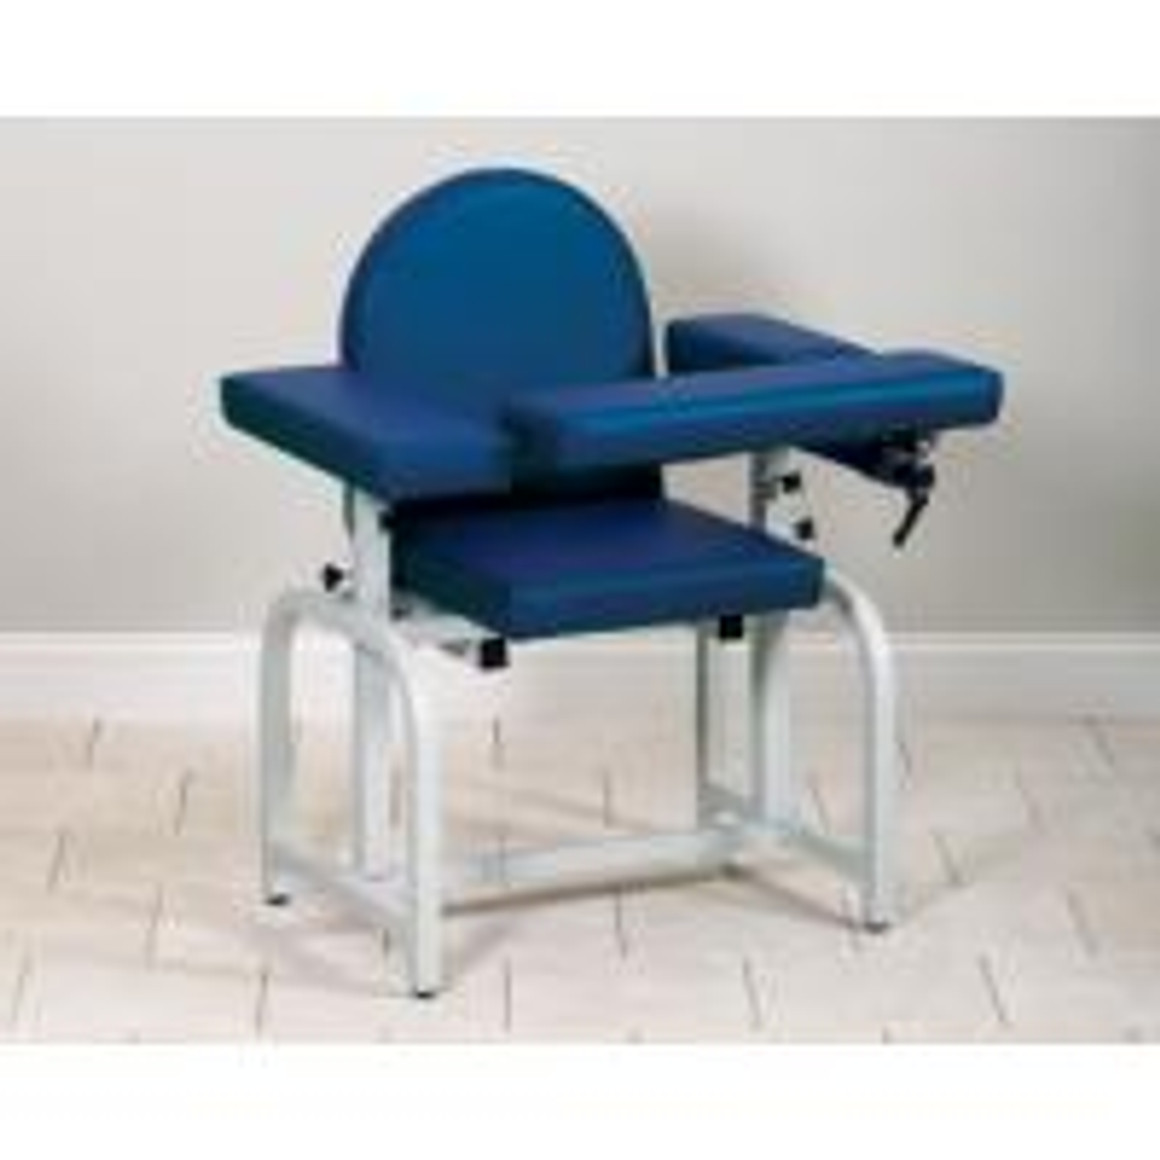 Clinton Lab X Series Blood Drawing Chair with Flip-Arm, Wedgewood